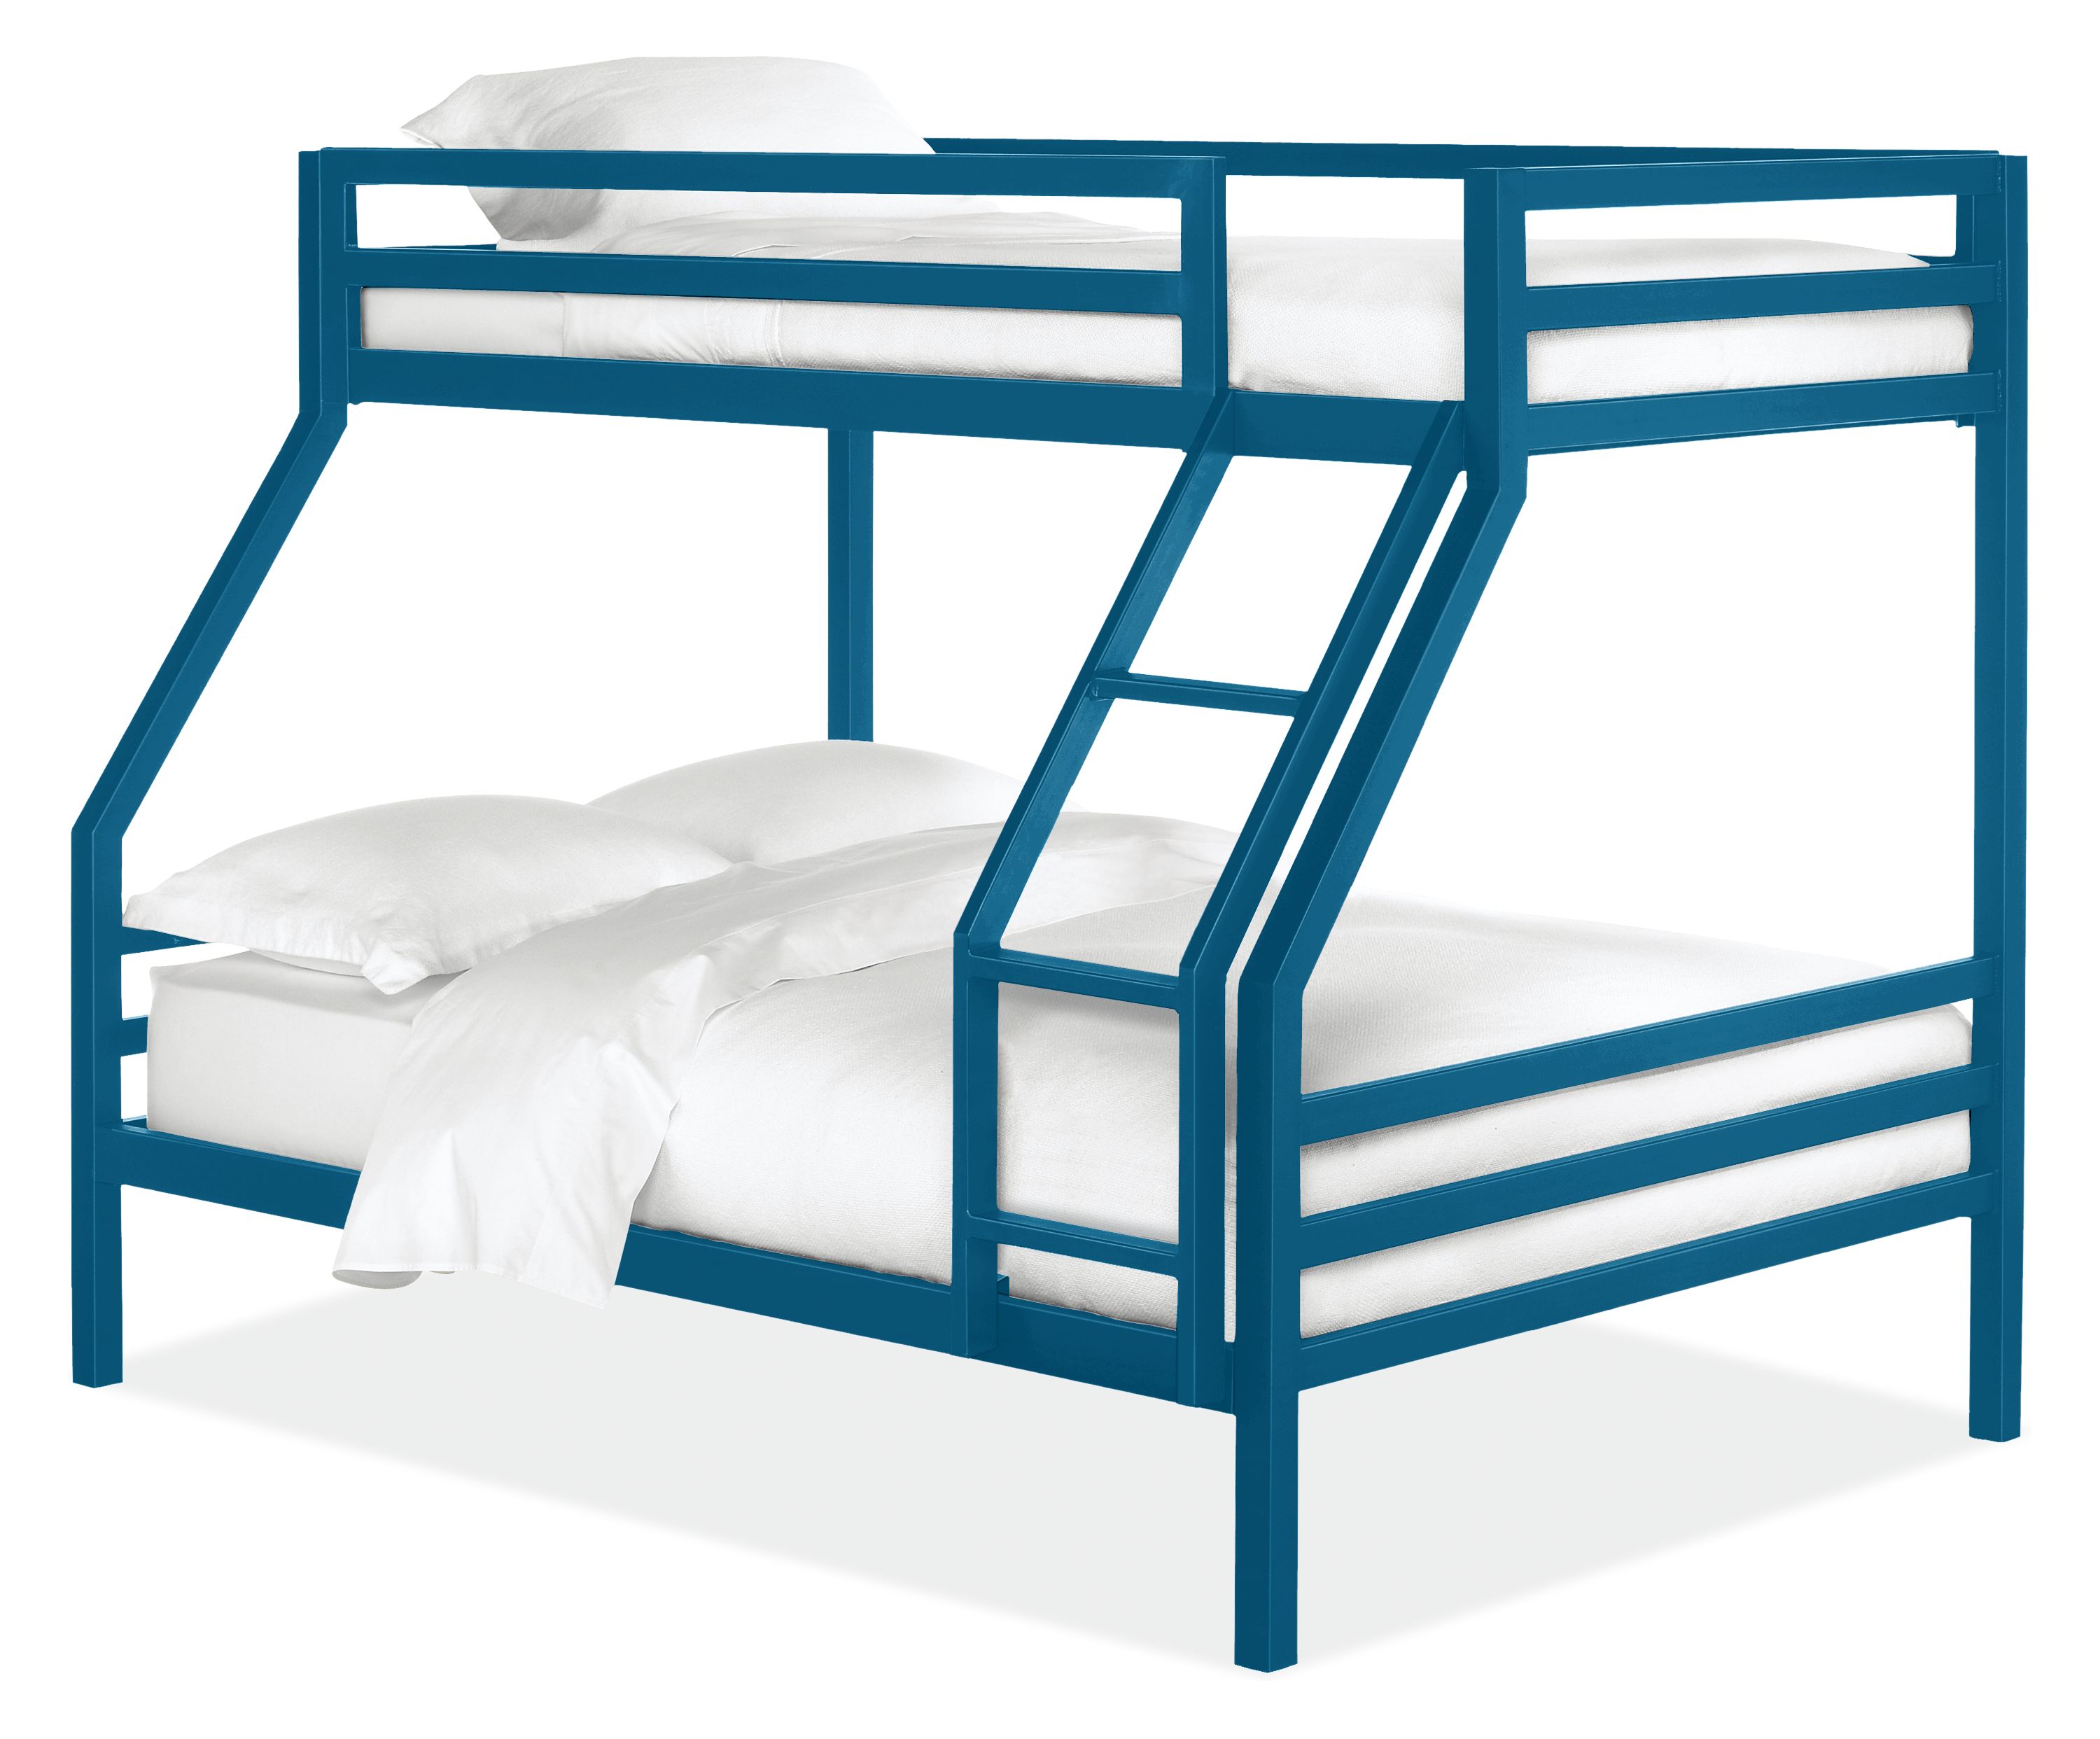 Fort Bunk Beds In Colors Twin Over, Full Over Bunk Beds That Separate